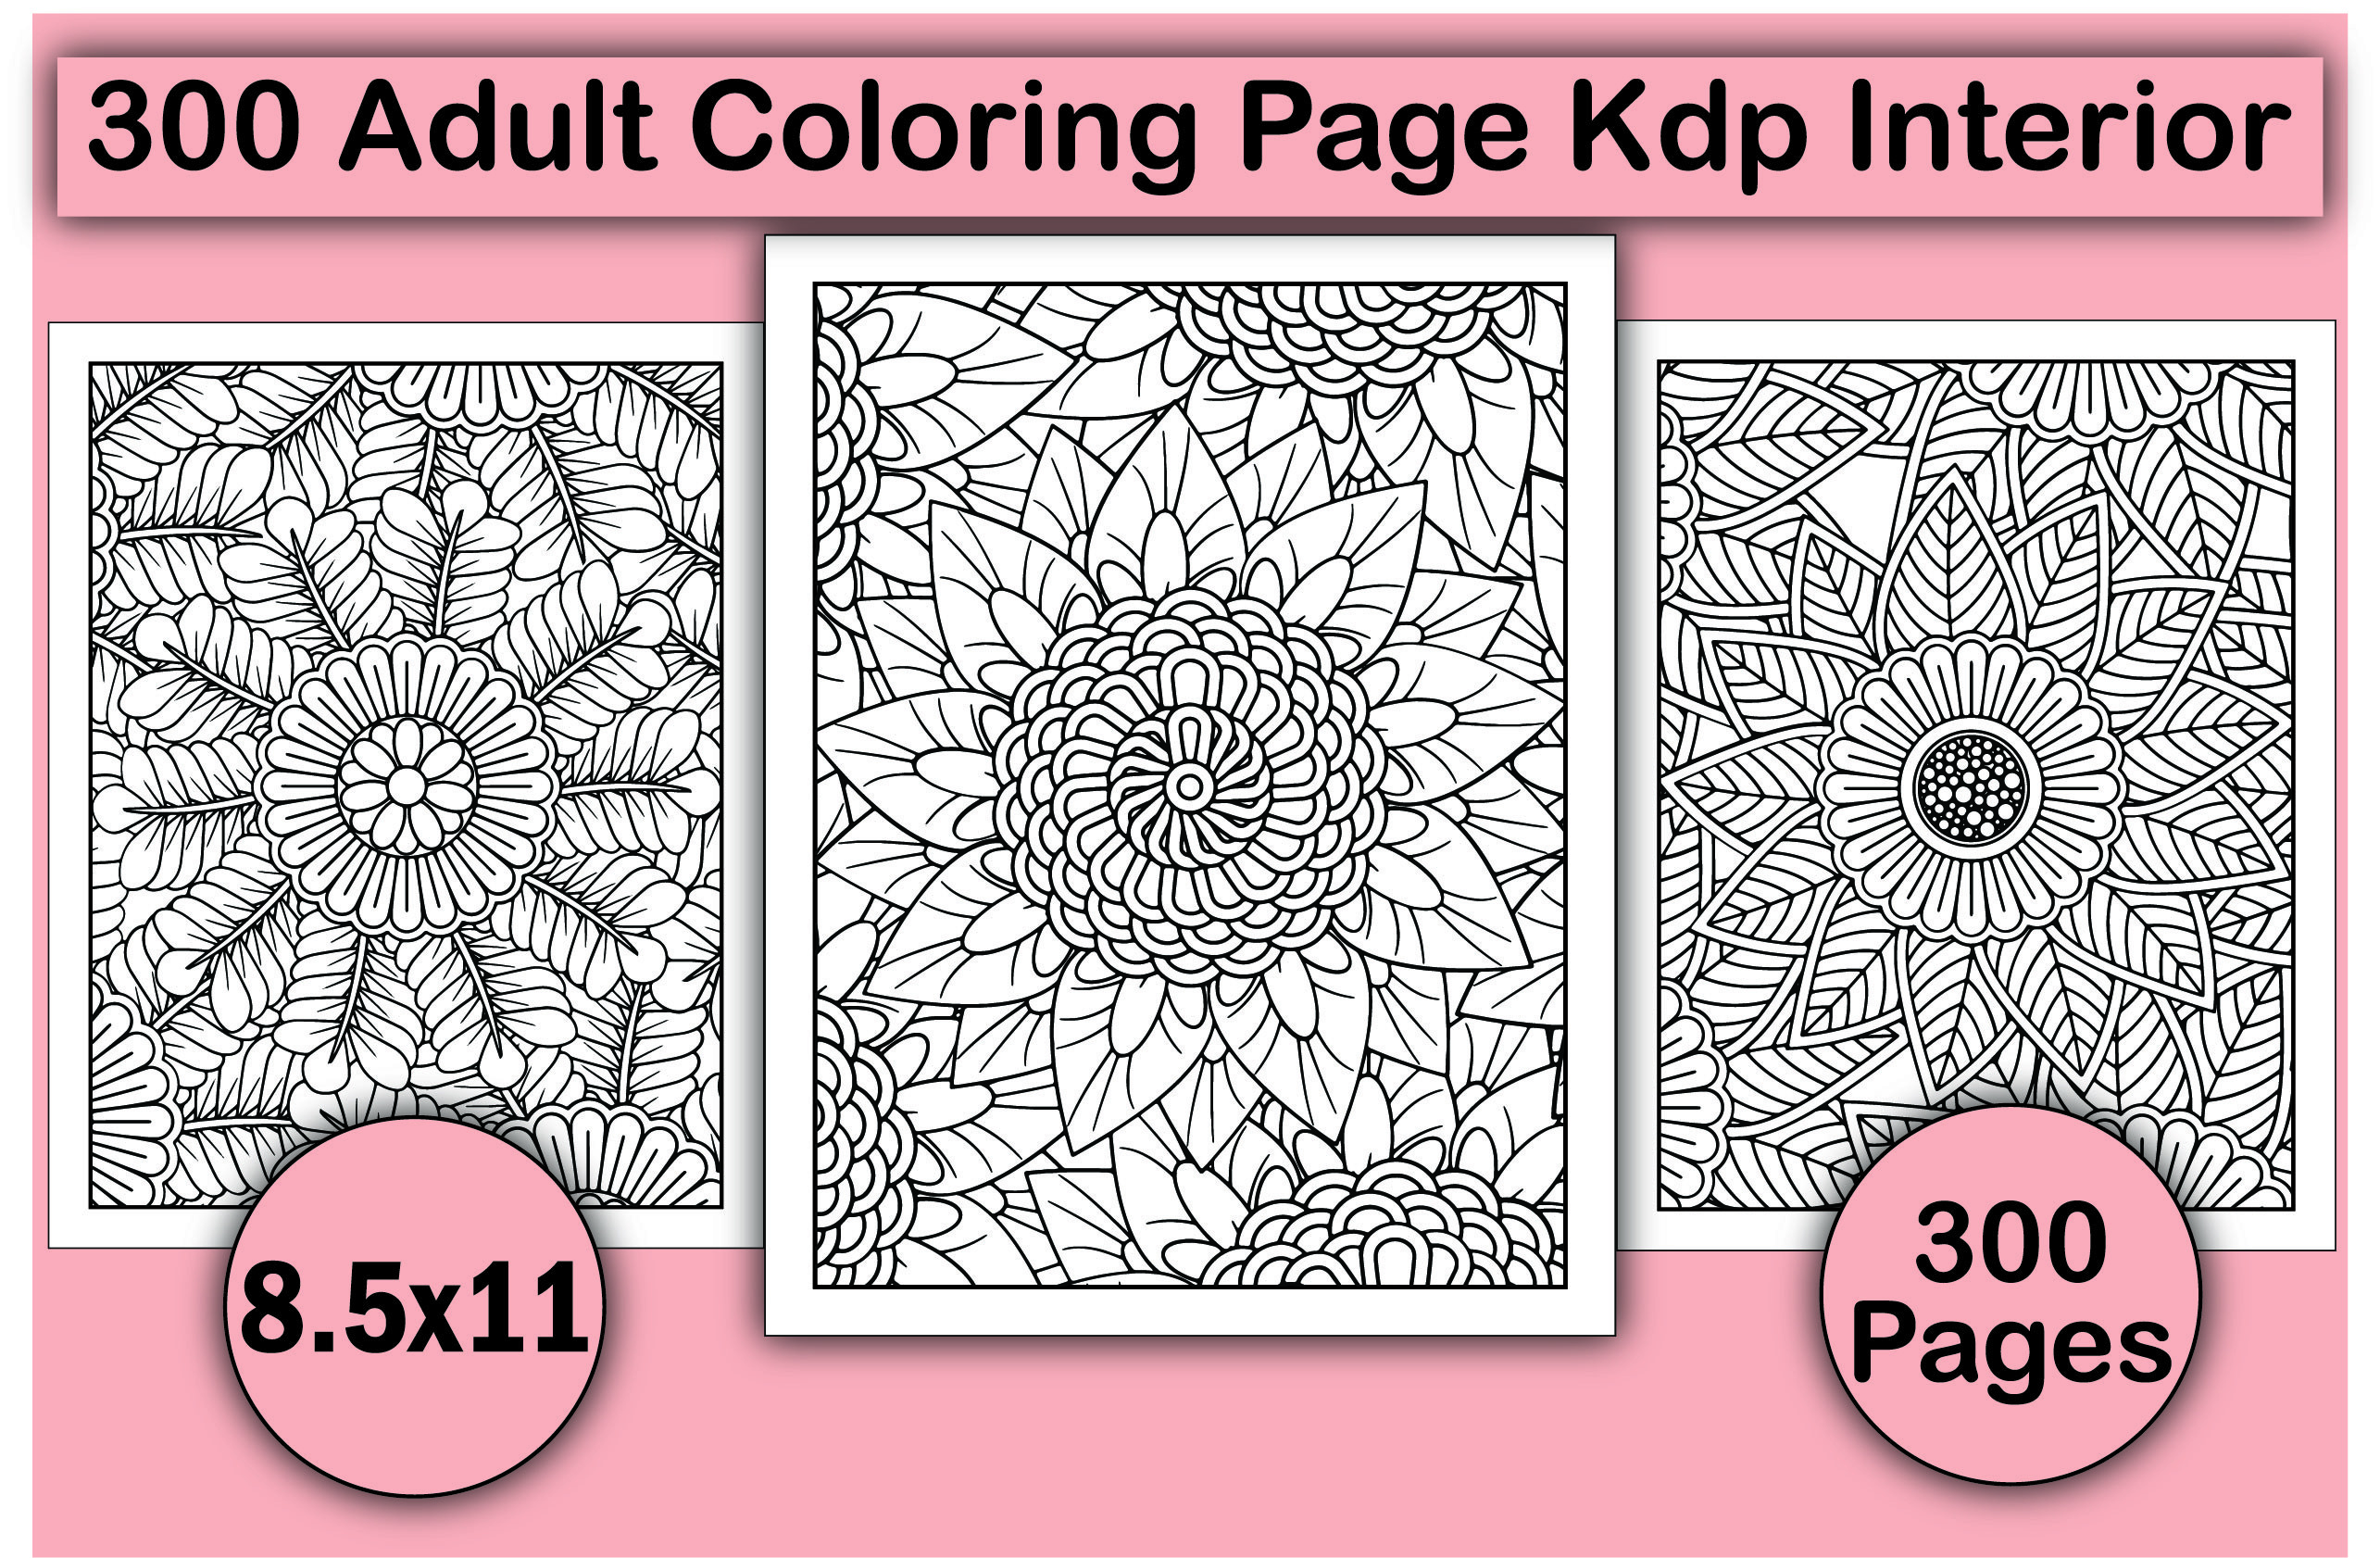 https://www.creativefabrica.com/wp-content/uploads/2023/03/28/300-Adult-Coloring-Page-Kdp-Interior-Graphics-65529218-1.jpg